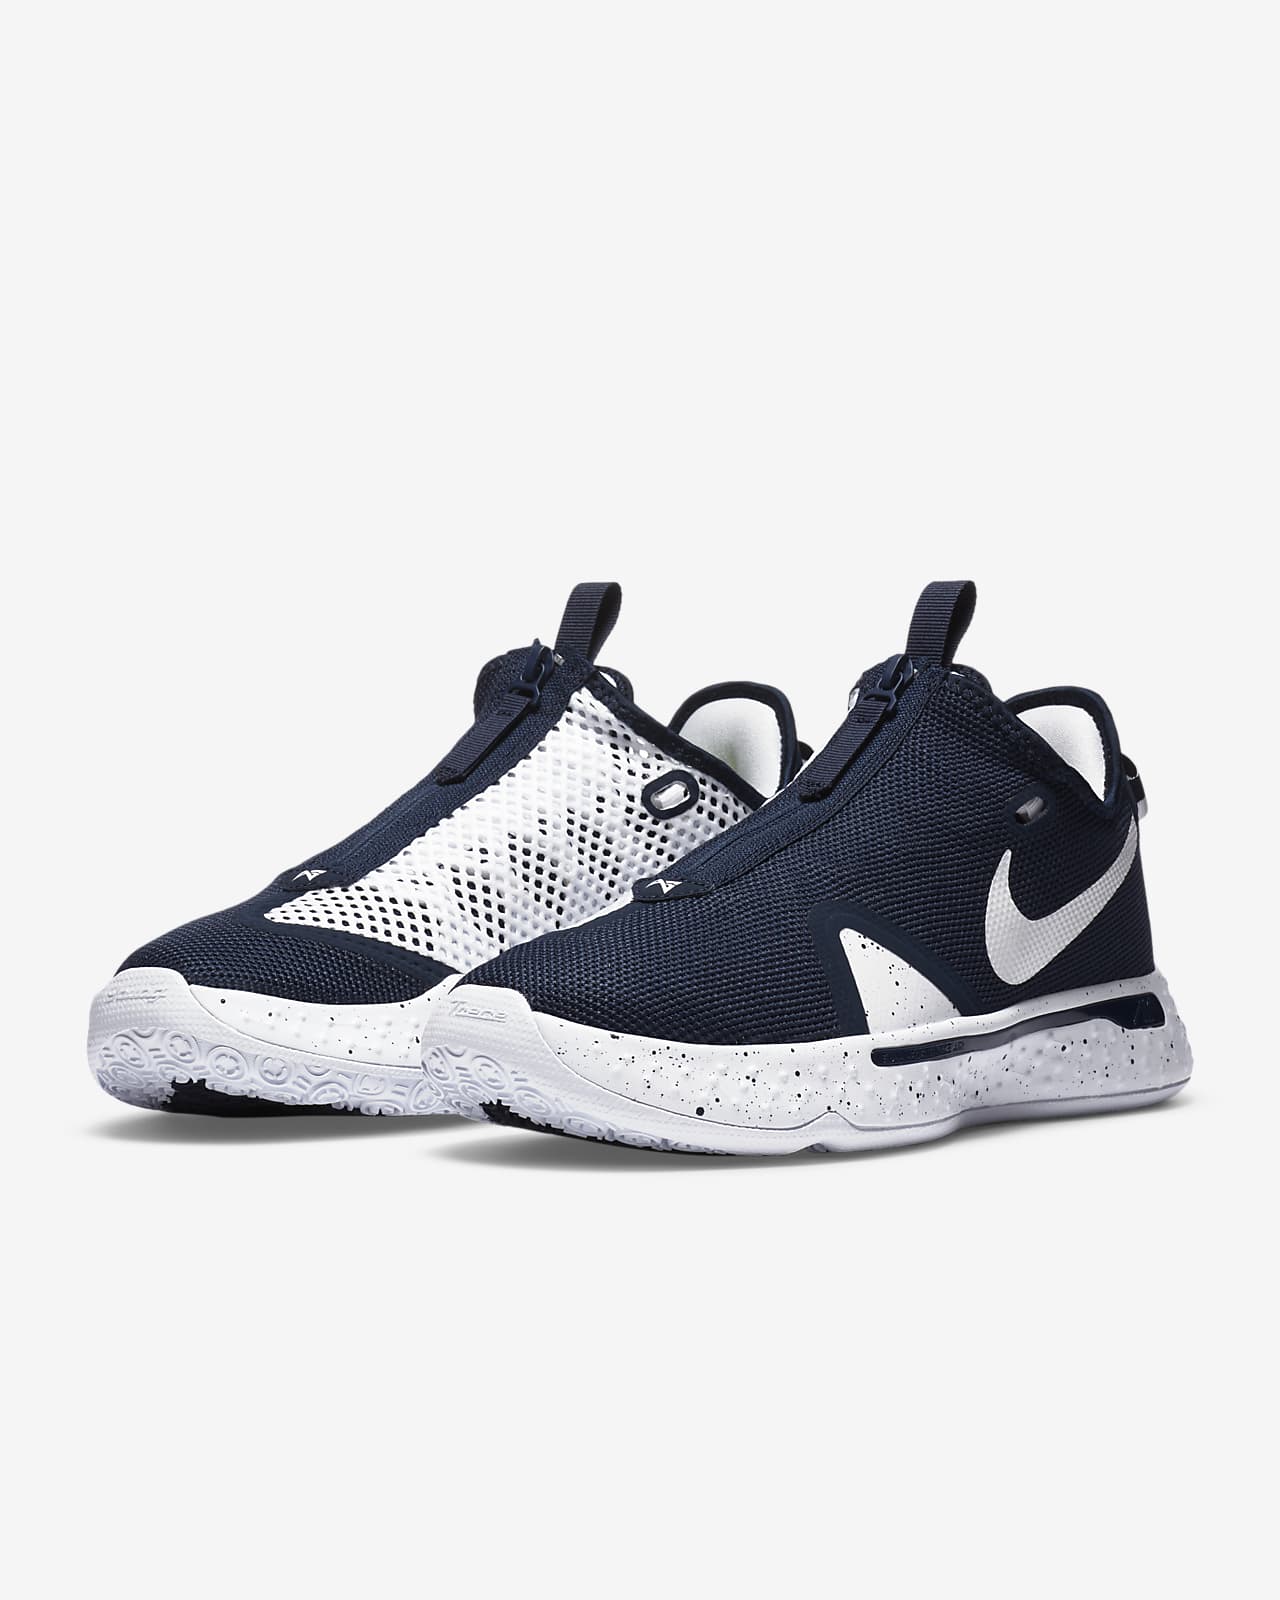 white and navy basketball shoes